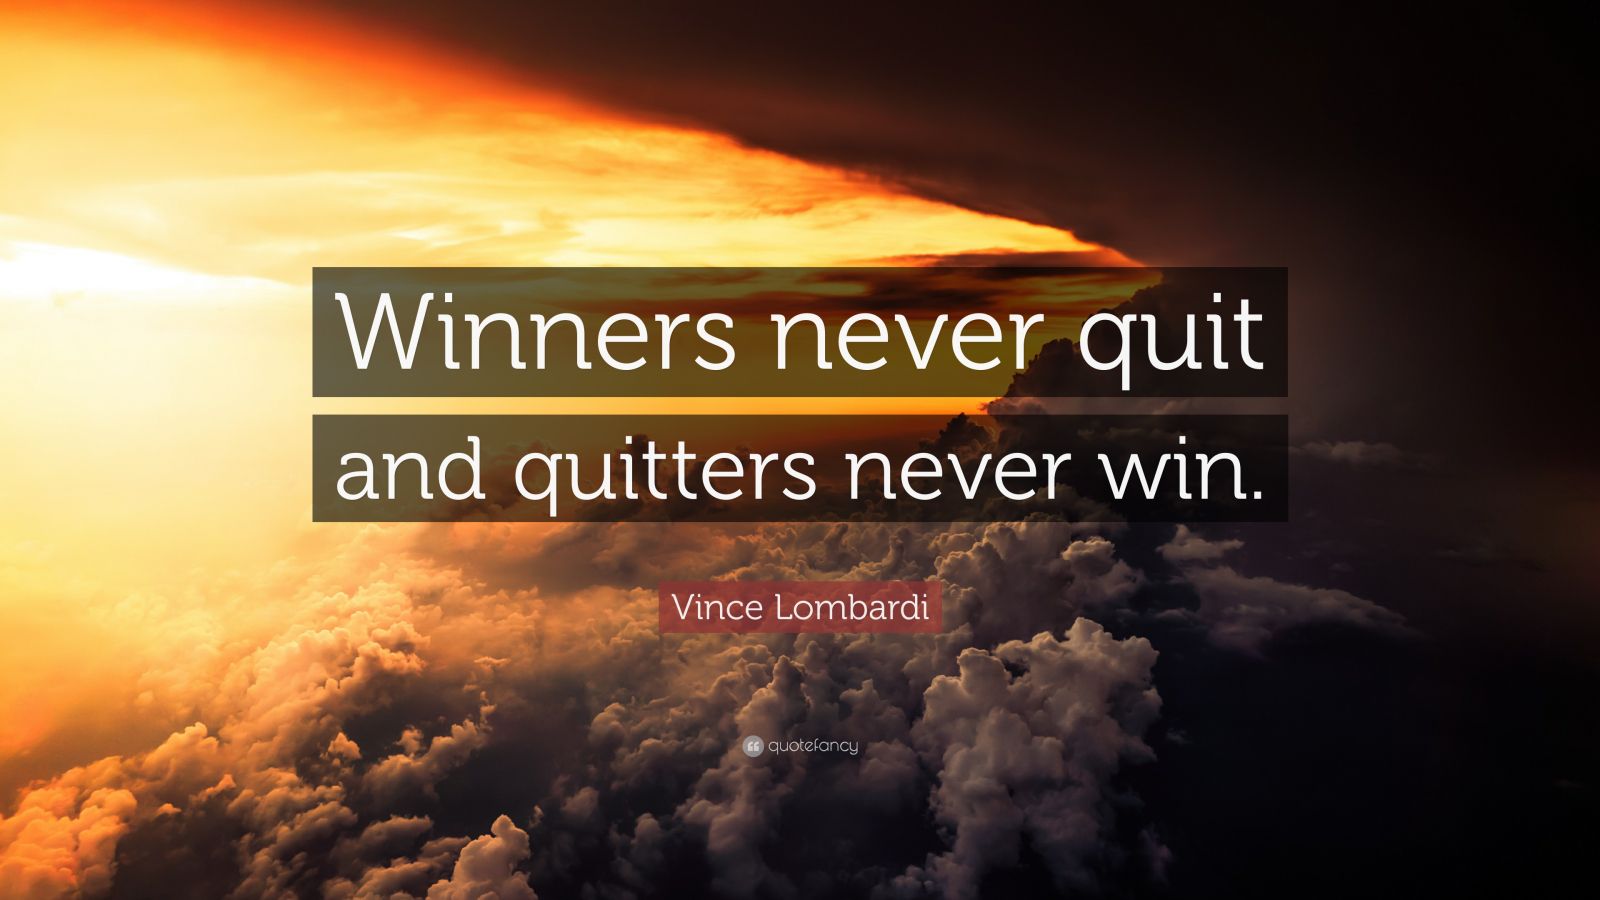 Vince Lombardi Quote: 